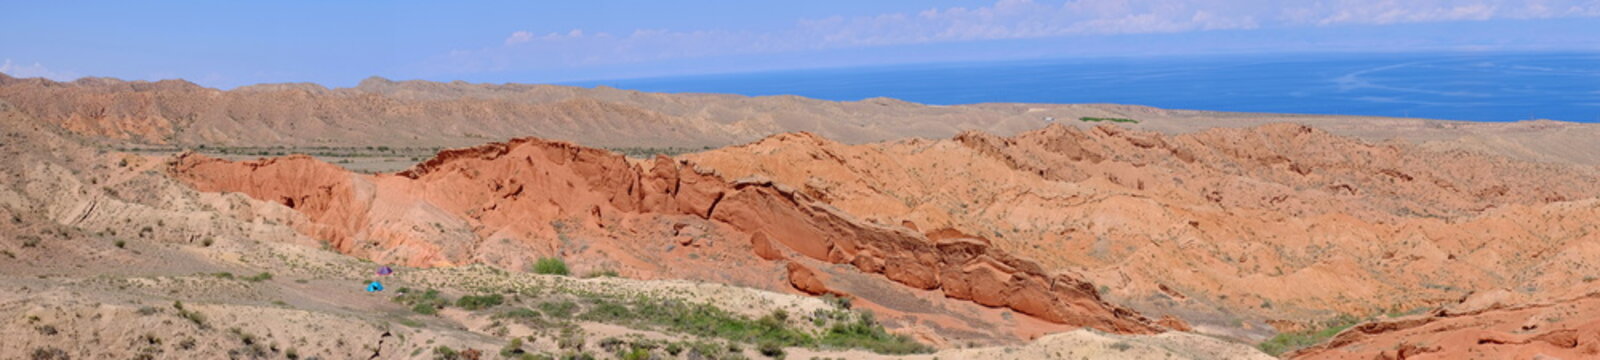 Panorama of the Tale of the Canyon